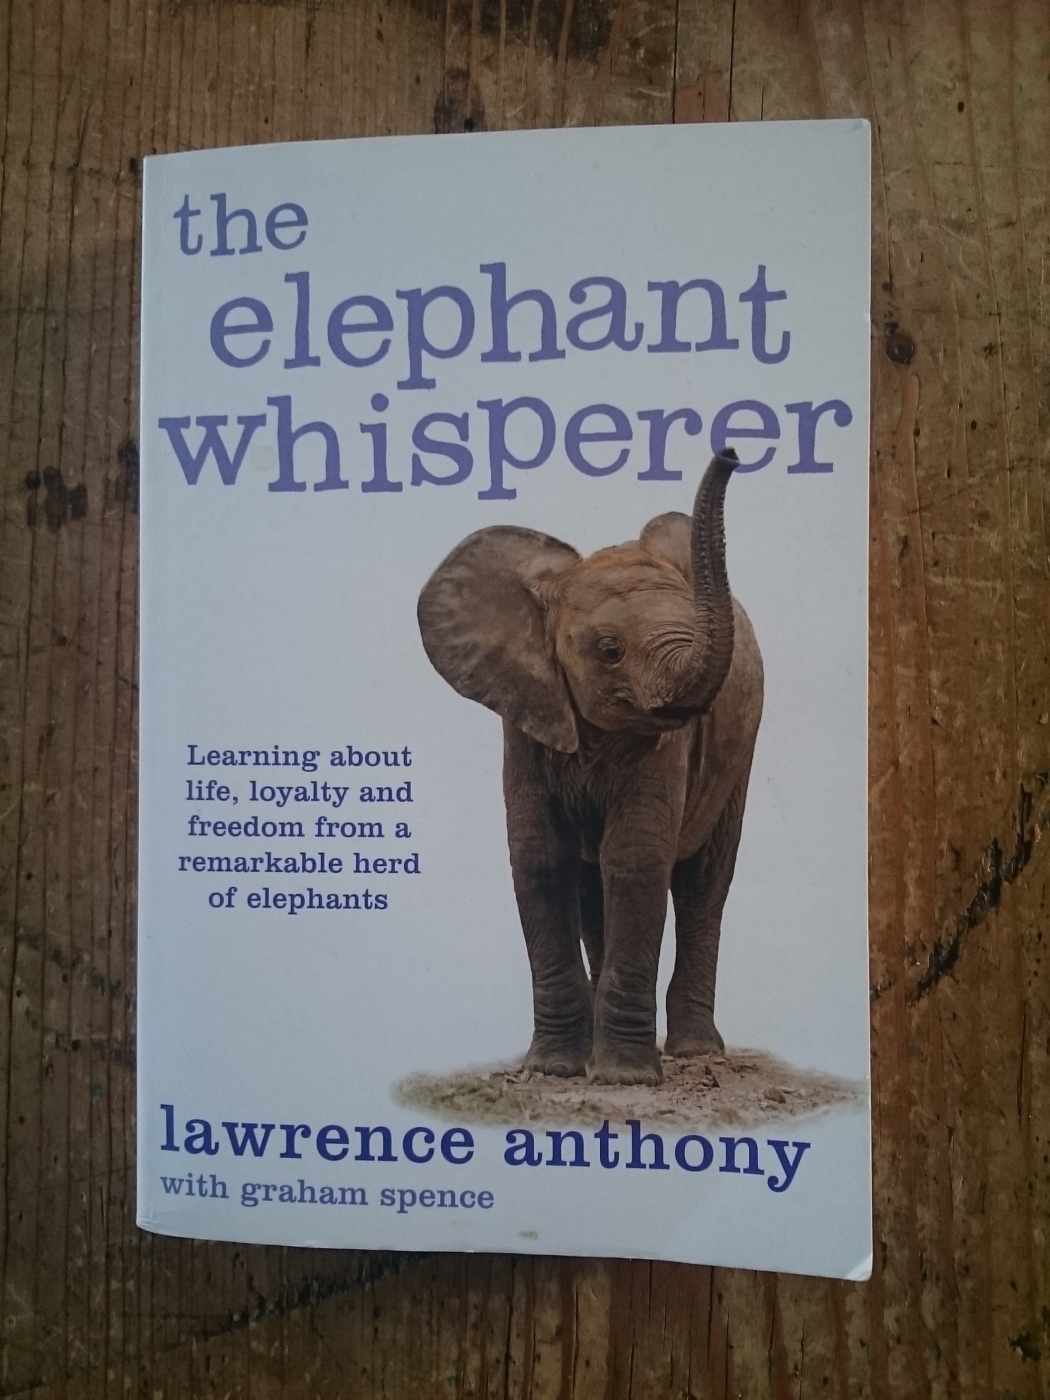 July – The Elephant Whisperer by Lawrence Anthony, with Graham Spence ...